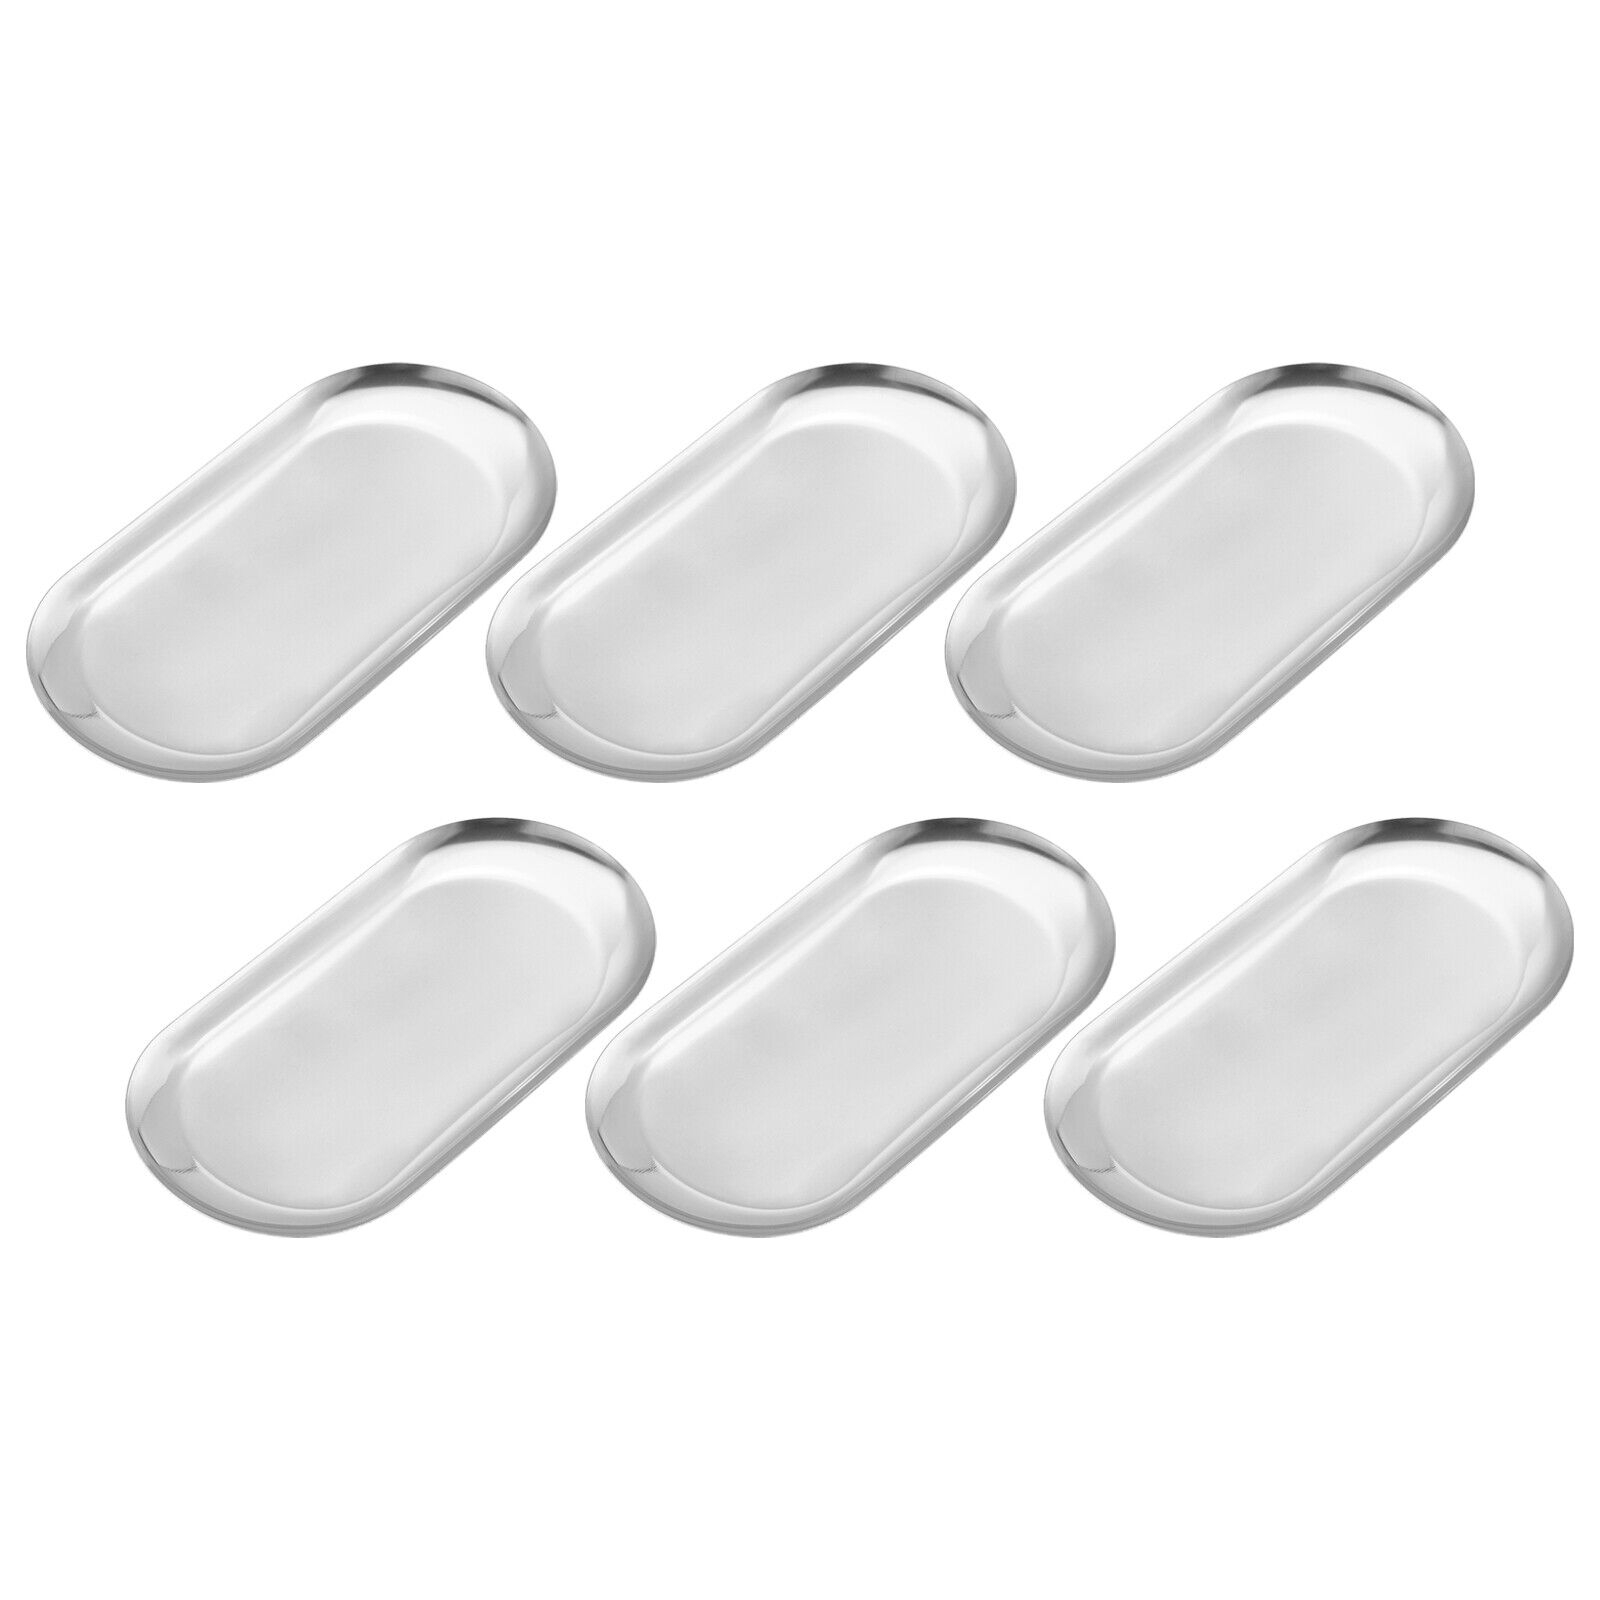 6pcs Stainless Steel Decorative Trays Silver Bathroom Cosmetic Trays (7 Inch)